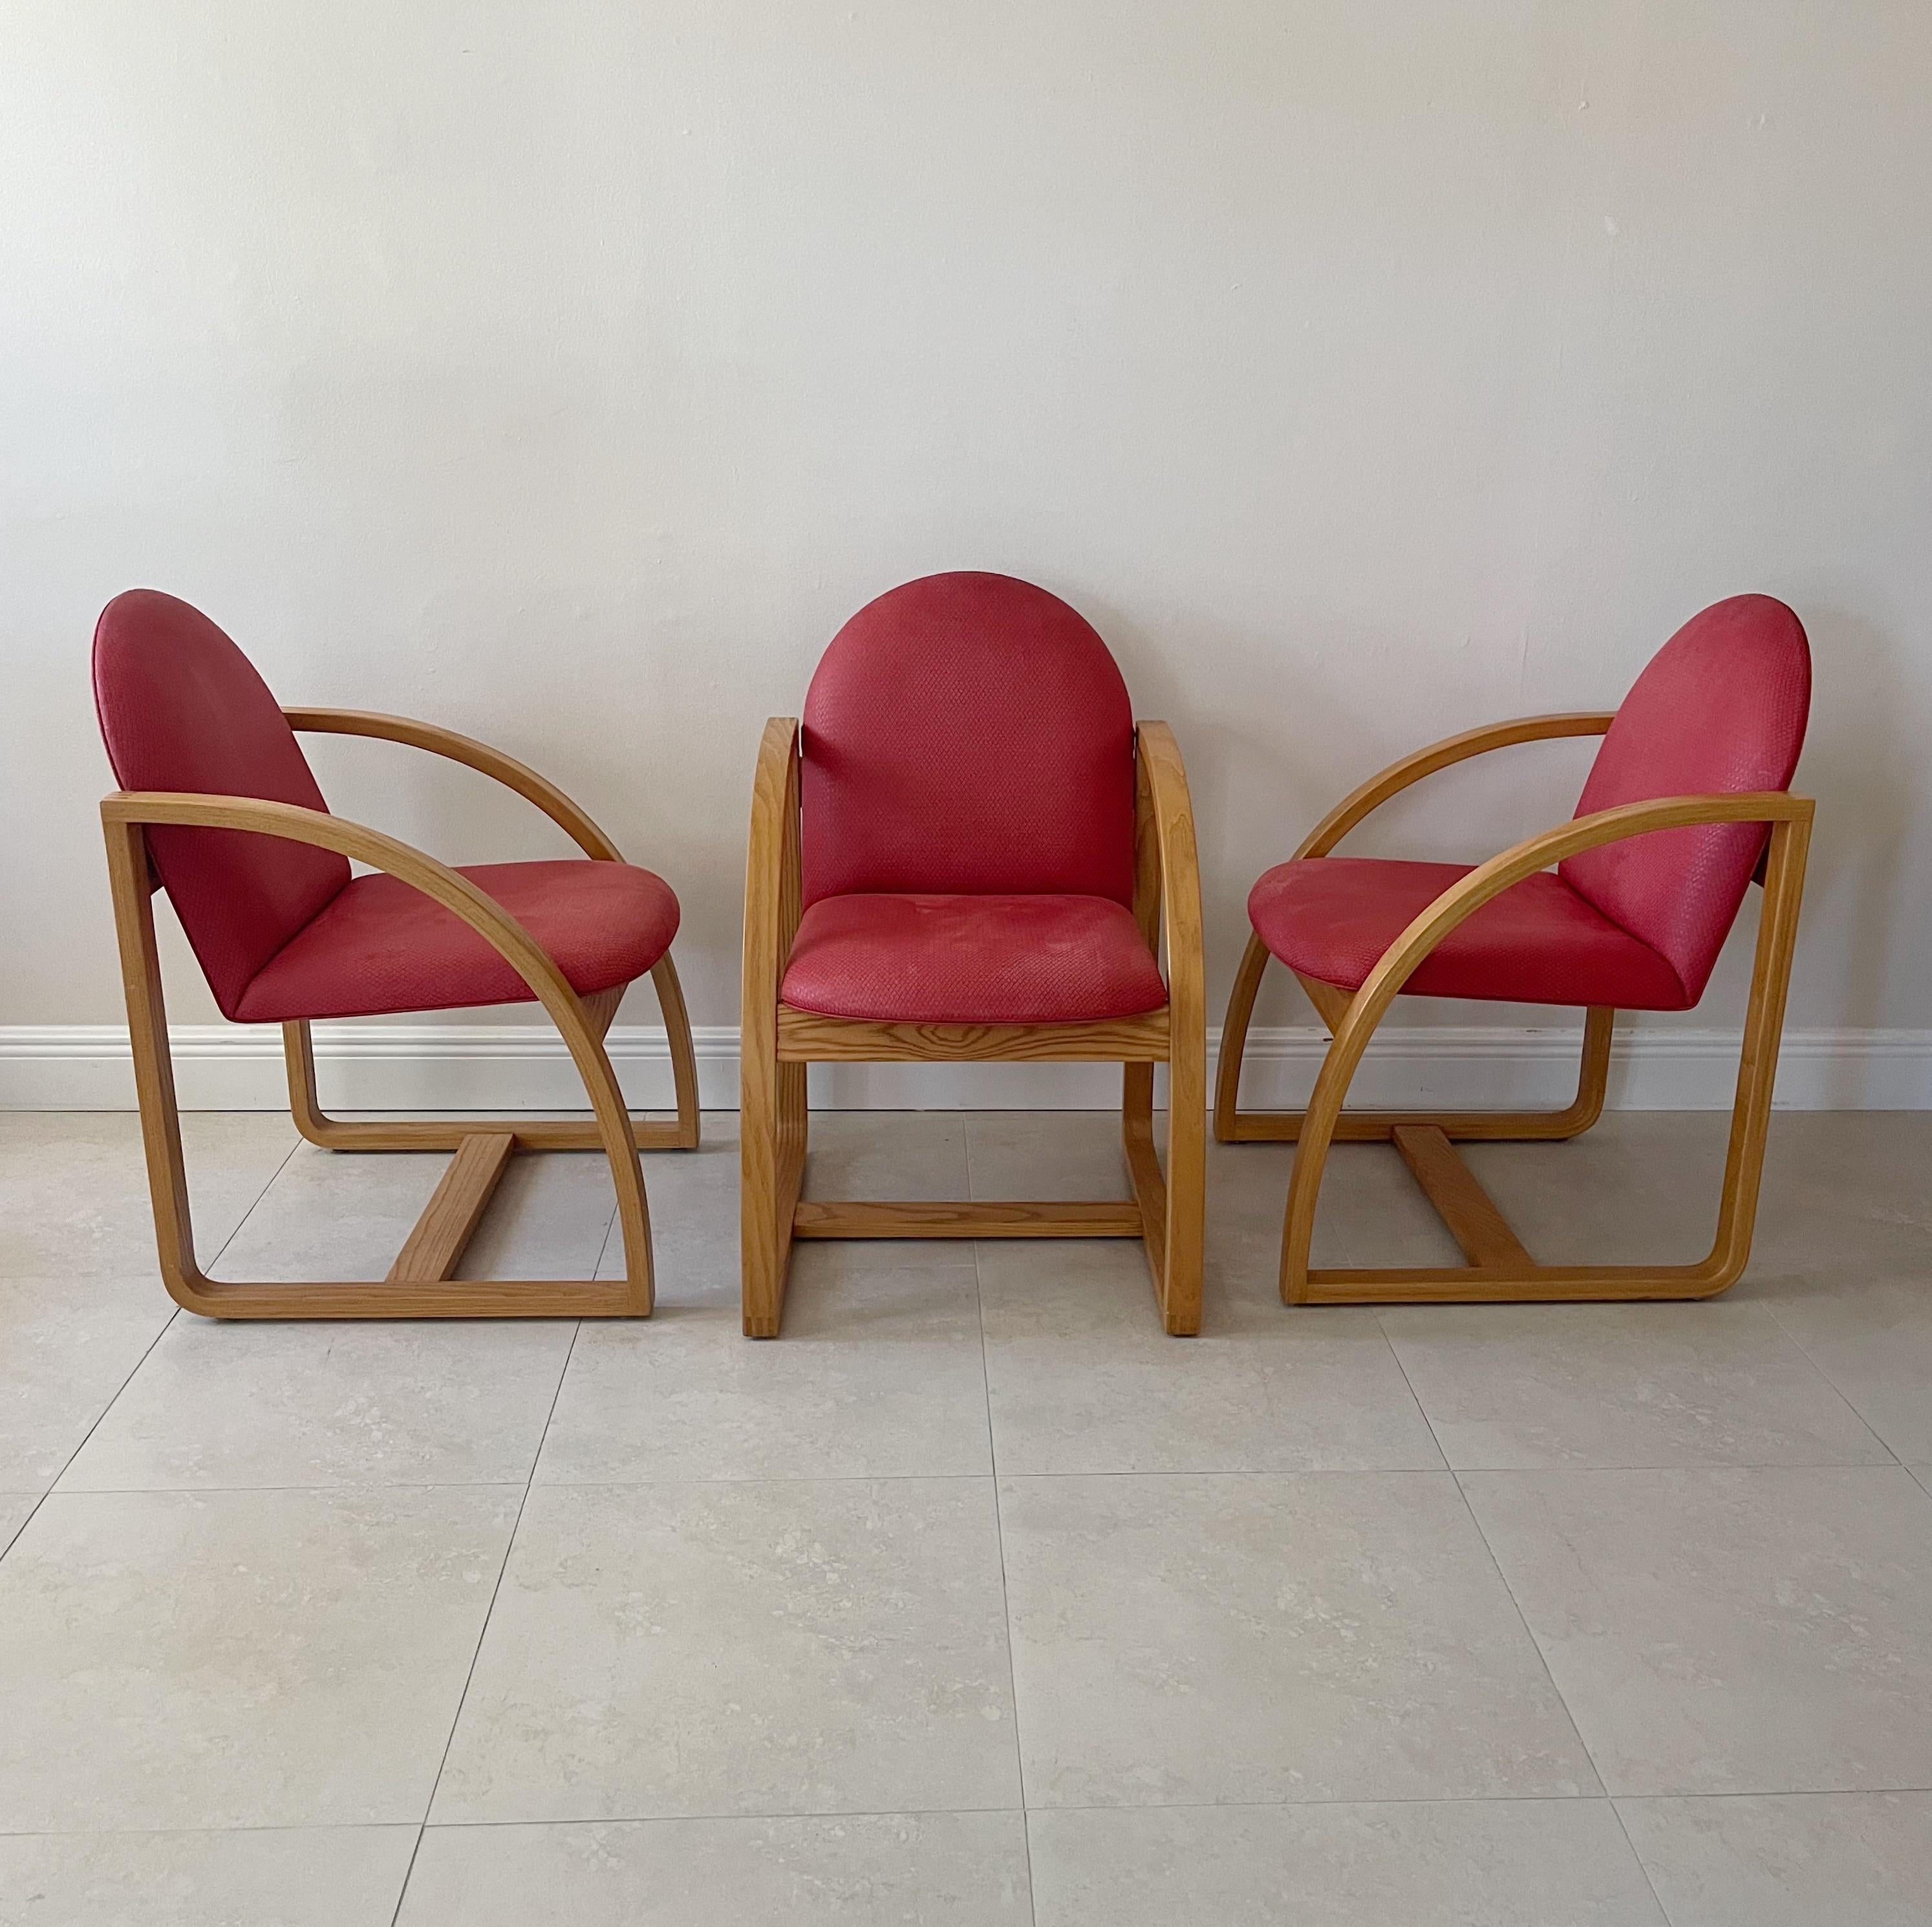 Set of six wood dining chairs with original red upholstery by Peter Danko, born Washington DC 1949. Peter designed the Clyde’s chairs for Clyde’s Restaurant, Tysons Corner VA. This was his first large commission for multiples. Awarded a National